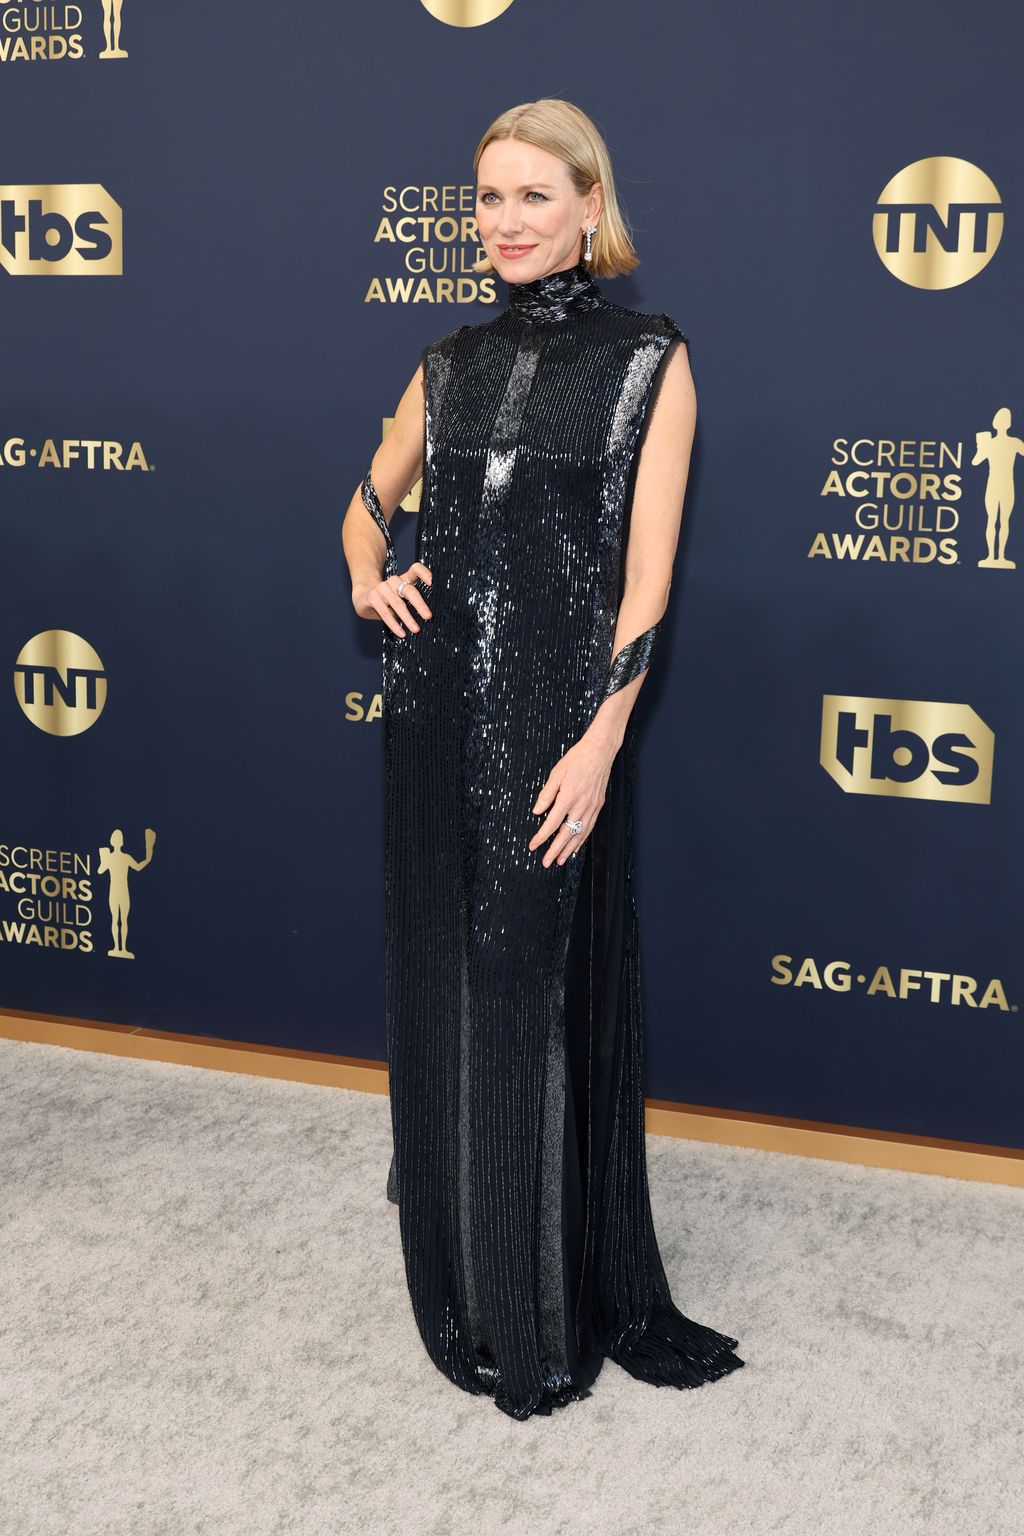 SANTA MONICA, CALIFORNIA - FEBRUARY 27: Naomi Watts attends the 28th Annual Screen Actors Guild Awards at Barker Hangar on February 27, 2022 in Santa Monica, California.  (Photo by Amy Sussman/WireImage)